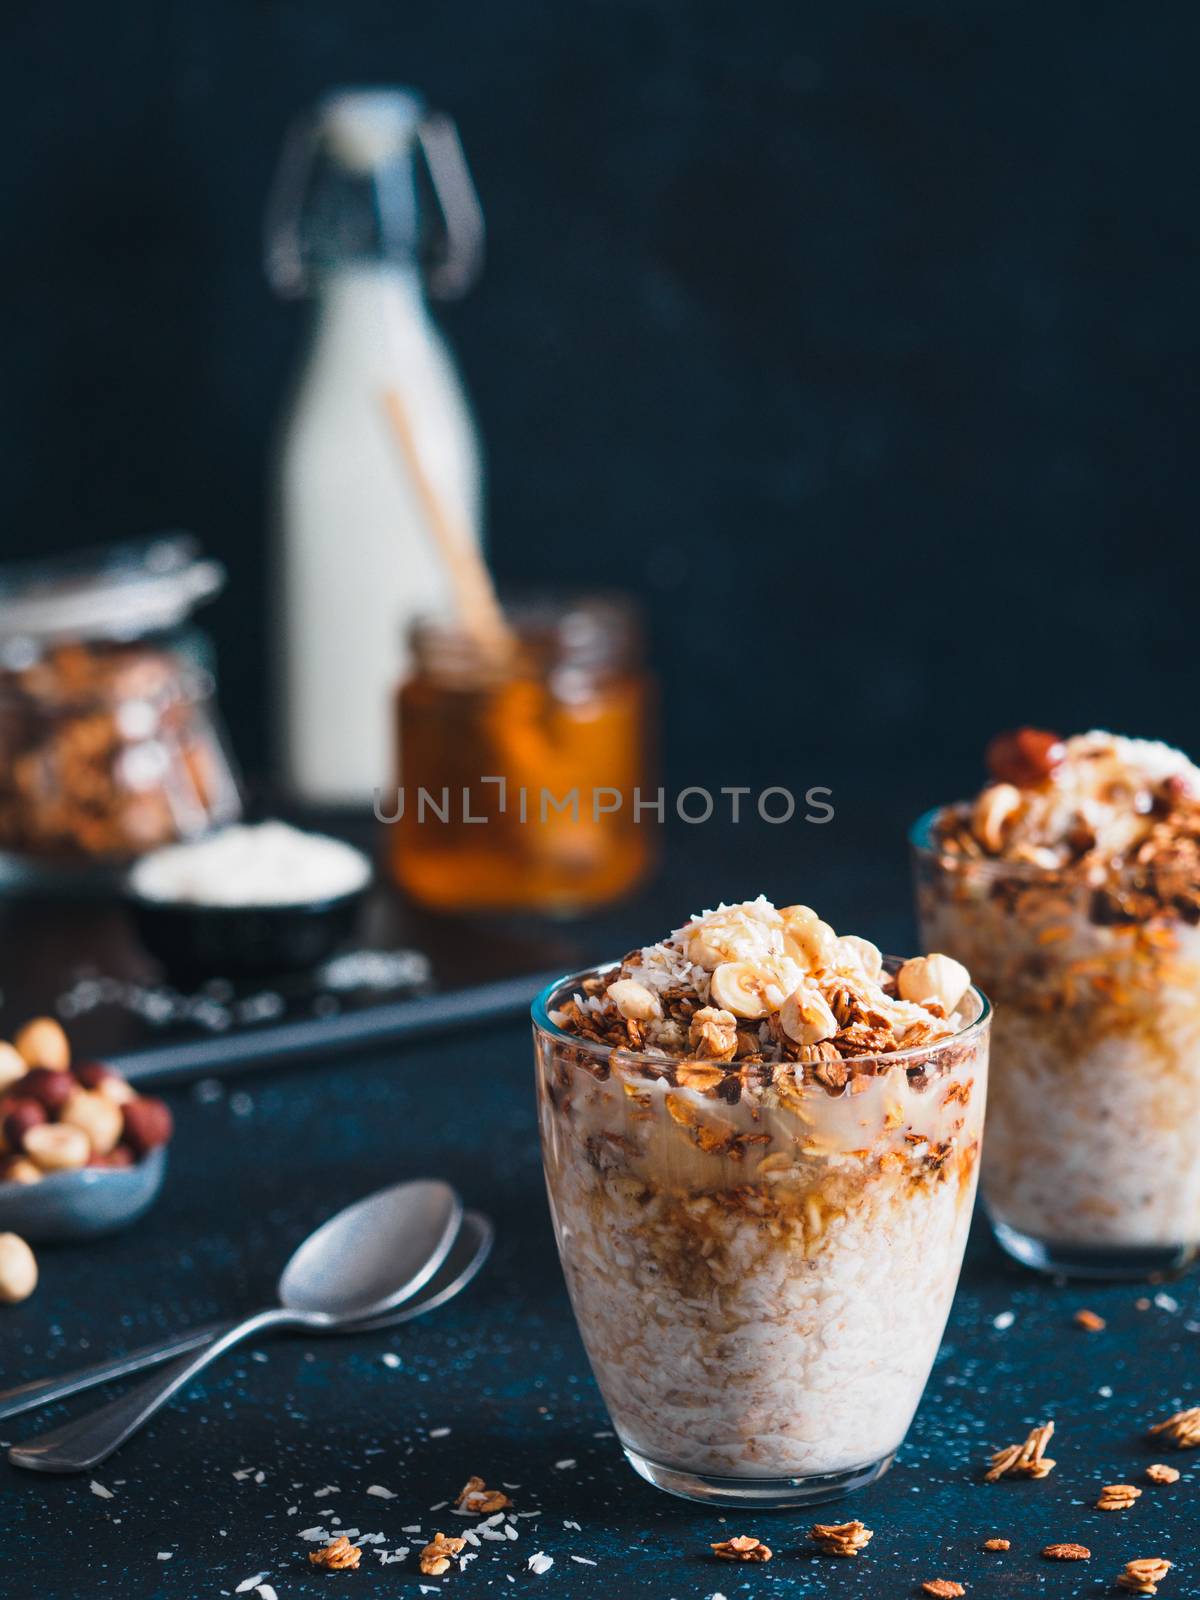 Gingerbread coconut overnight oats by fascinadora